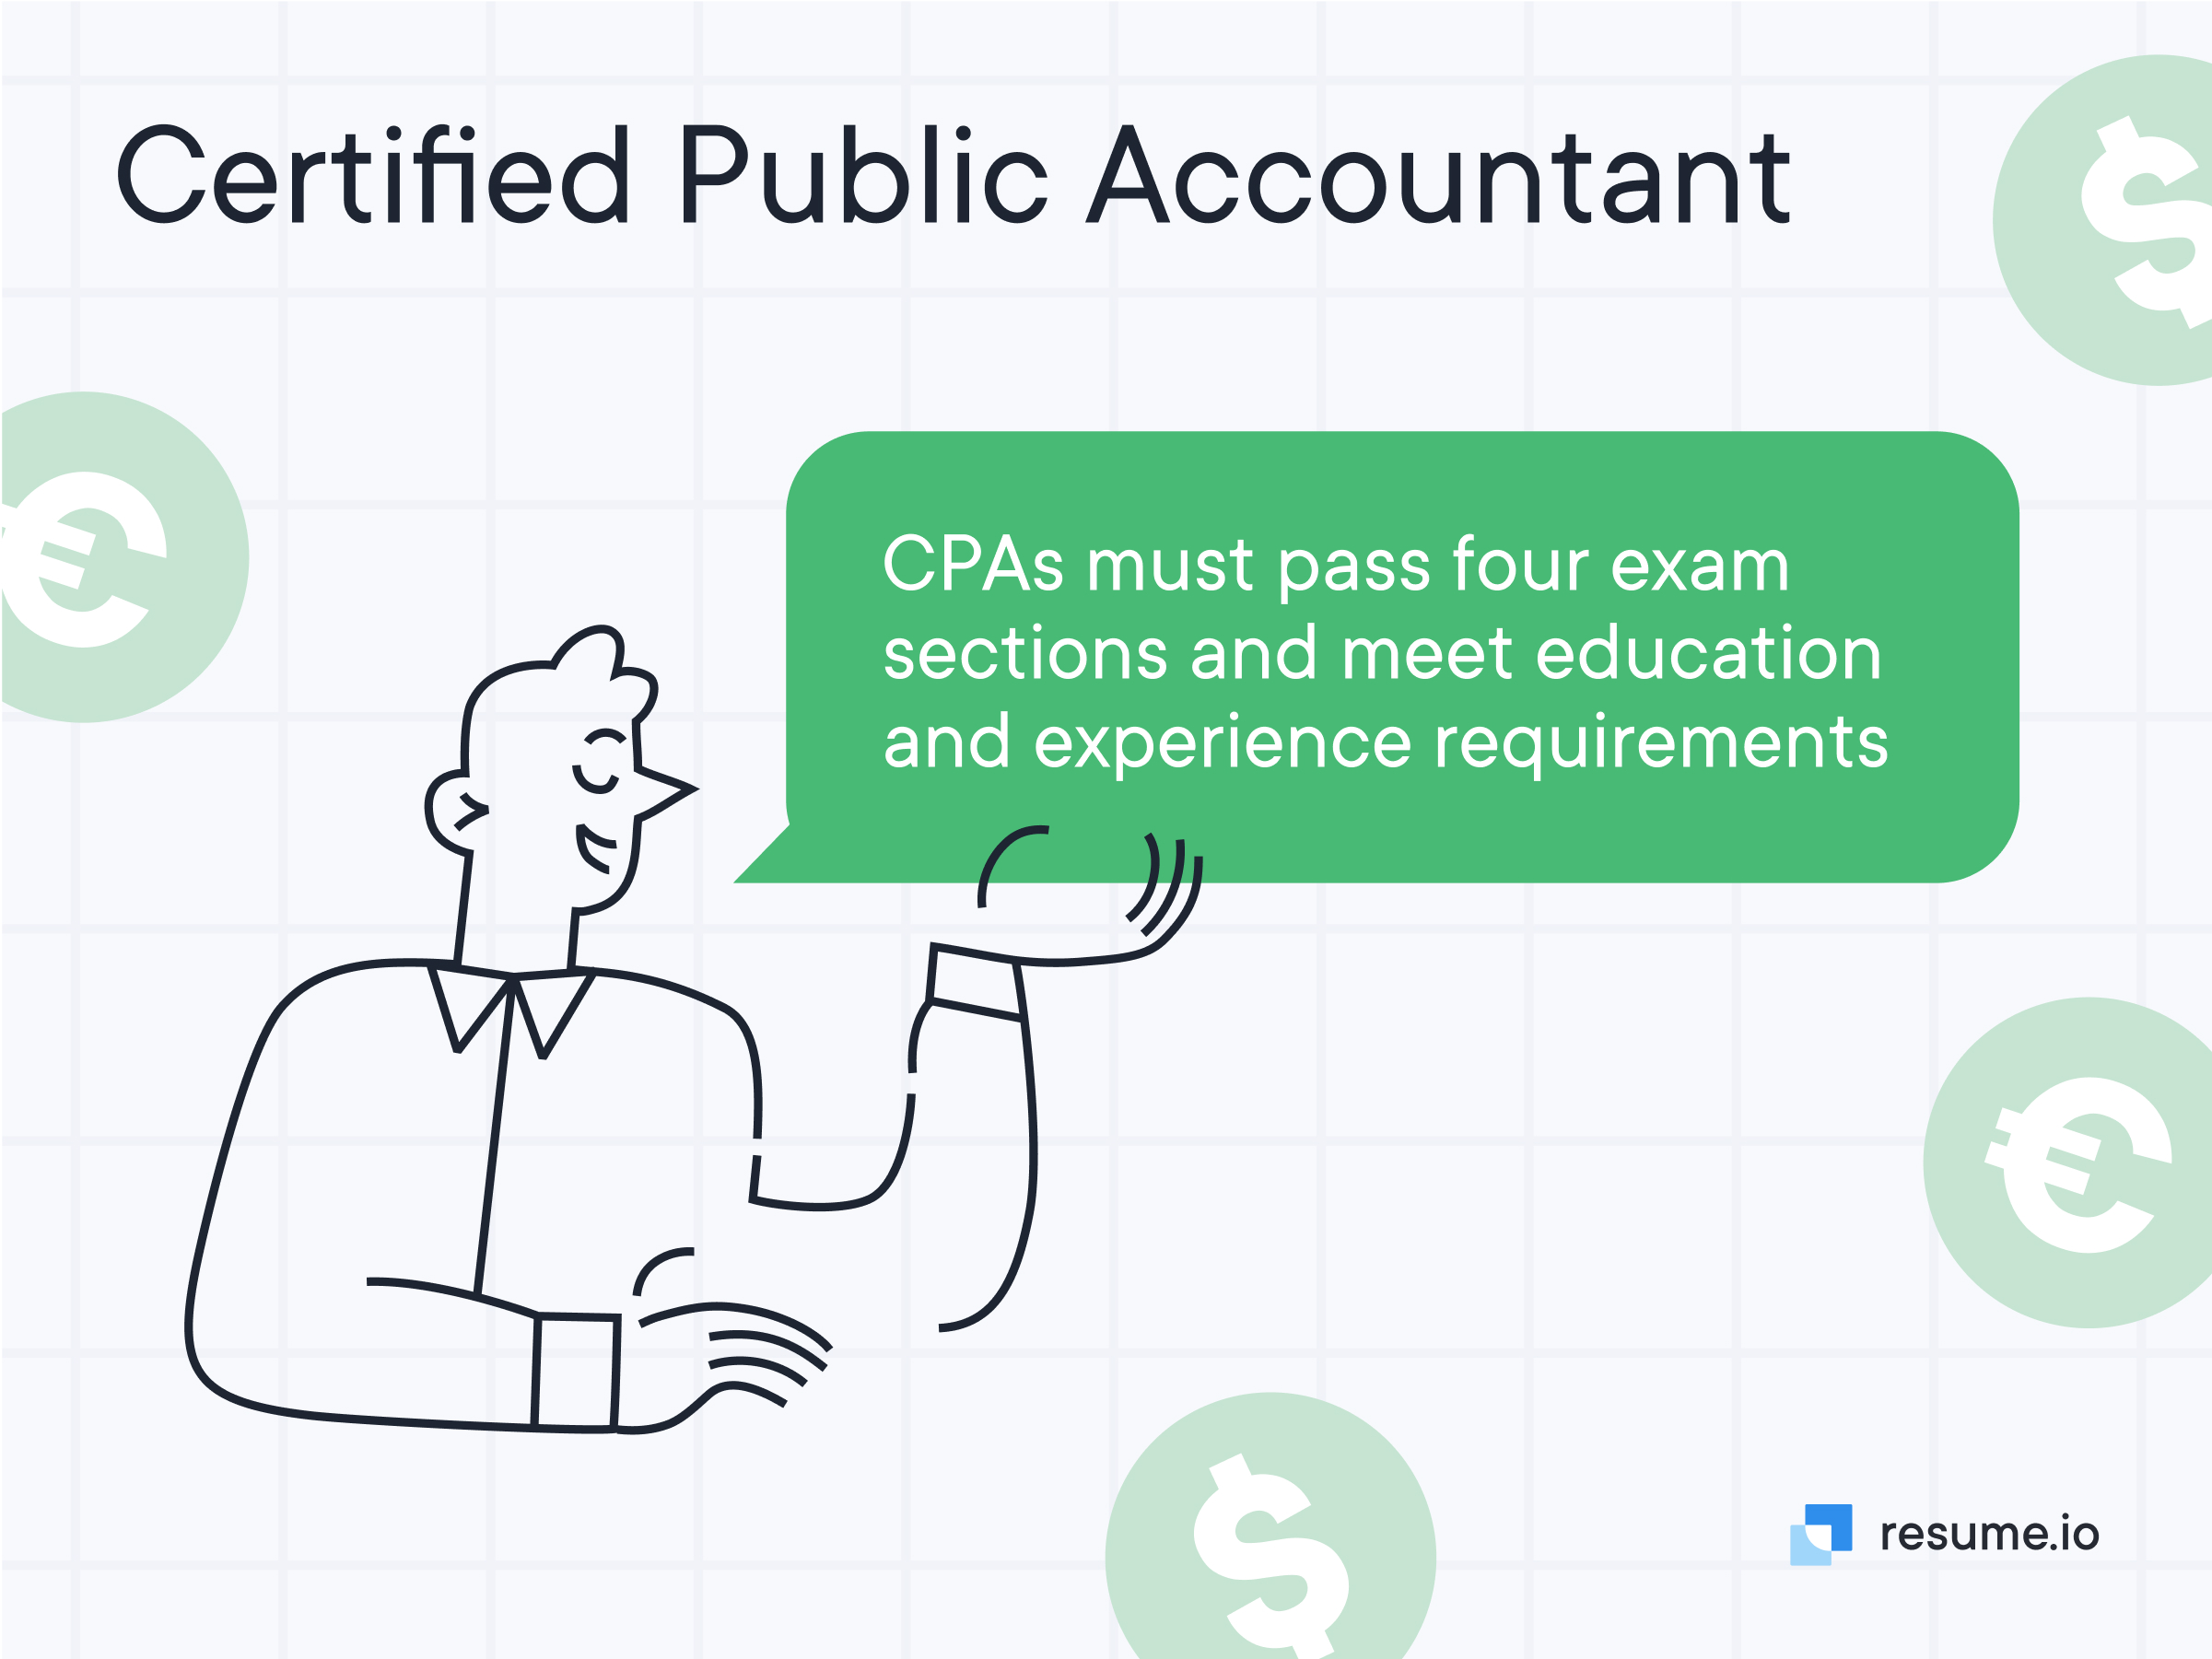 Illustrated person says that CPAs must pass four exam sections and meet education and experience requirements